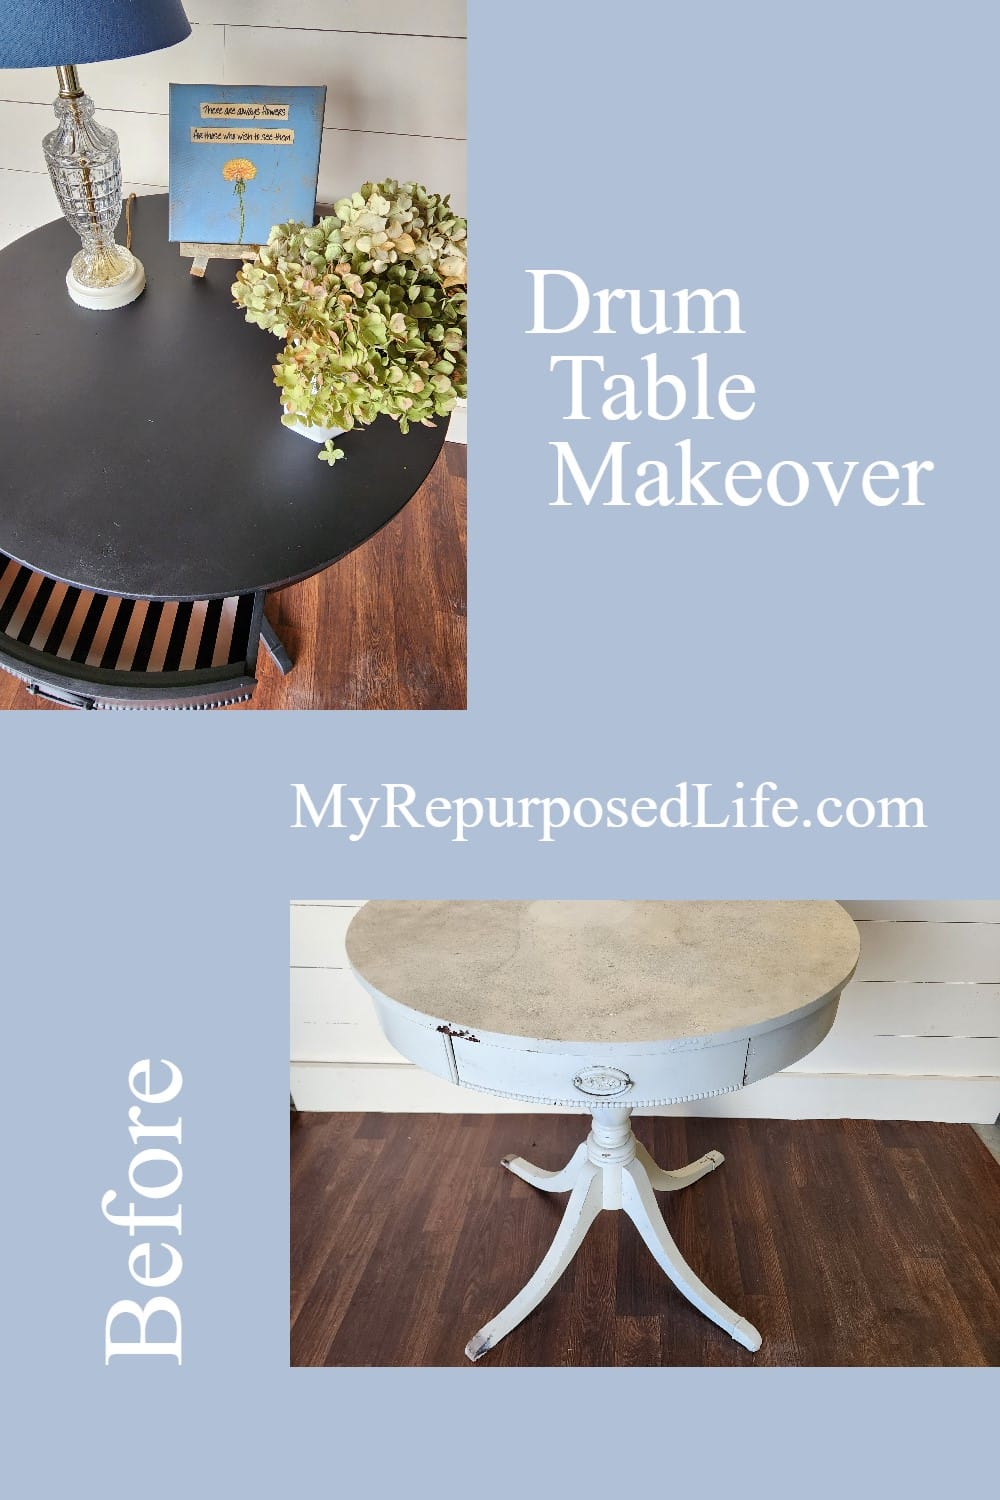 A less than perfect drum table gets a much needed update with a little paint and TLC. Great tips for using milk paint without waxing or sealing. #myrepurposedlife #furniturefixerupper via @repurposedlife